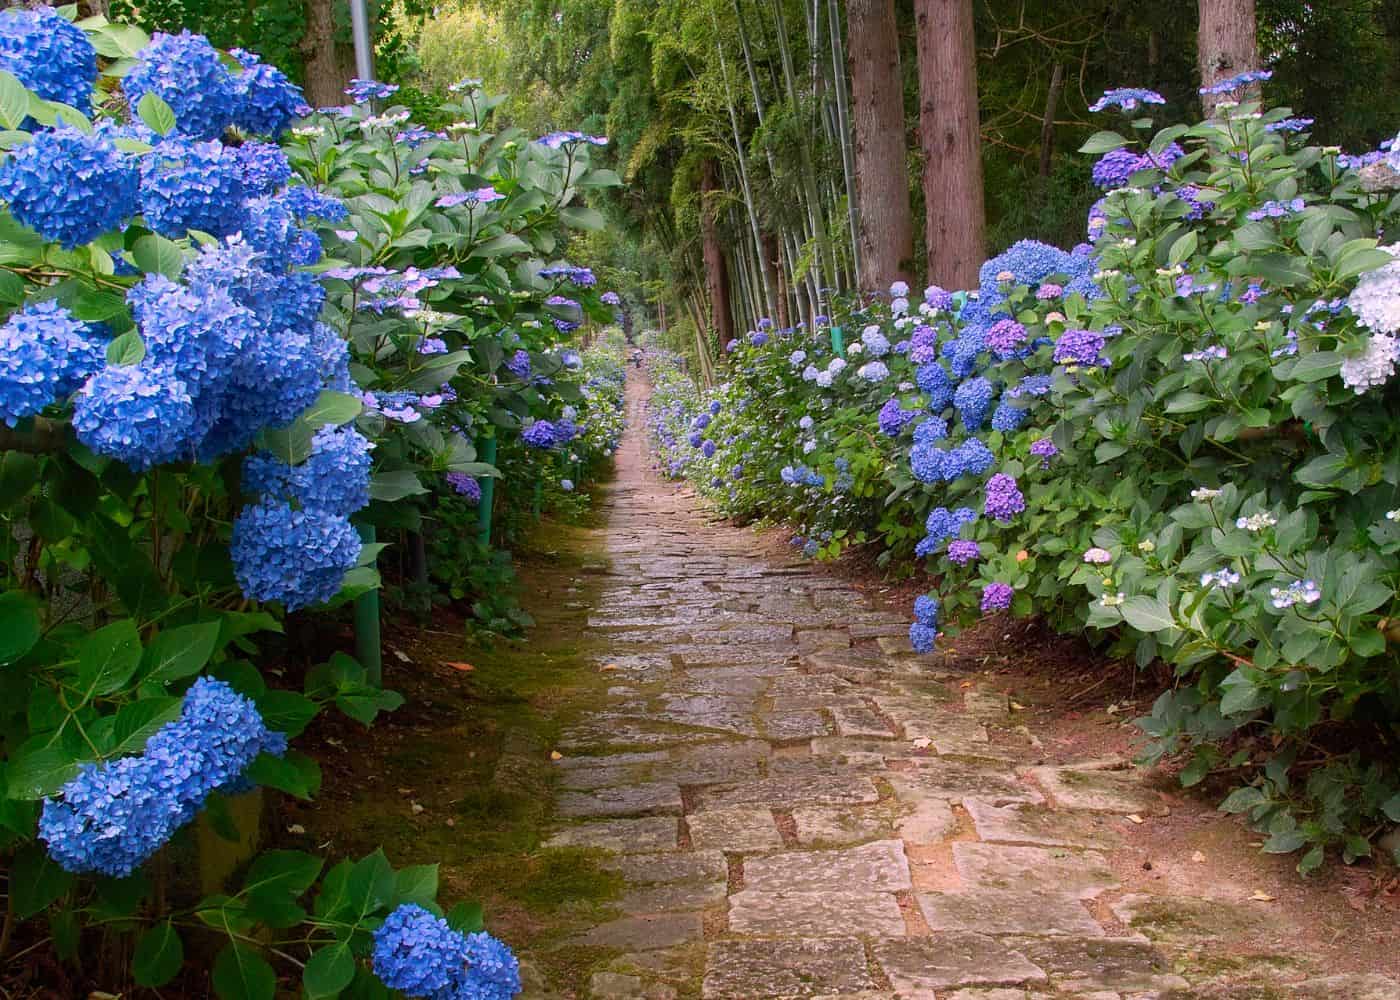 Garden path surrounded by hydrangeas